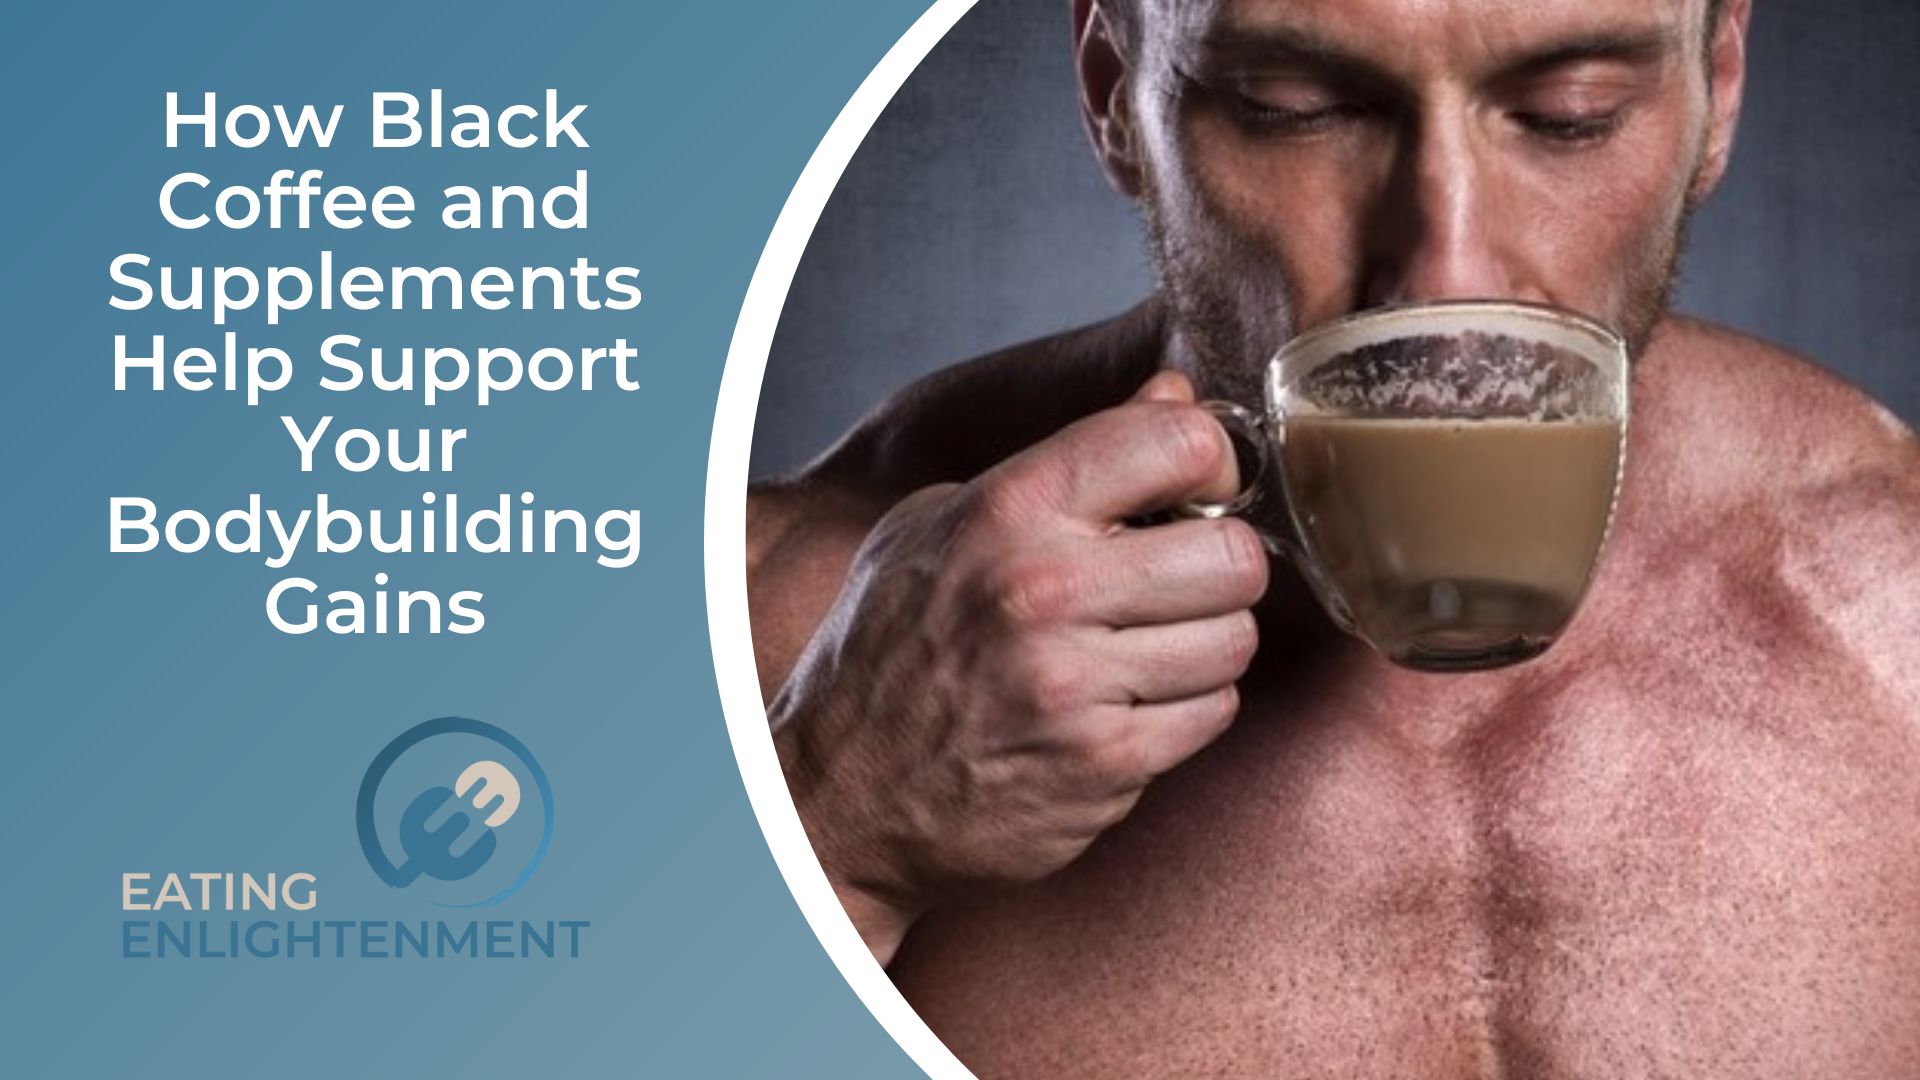 How Black Coffee and Supplements Help Support Your Bodybuilding Gains